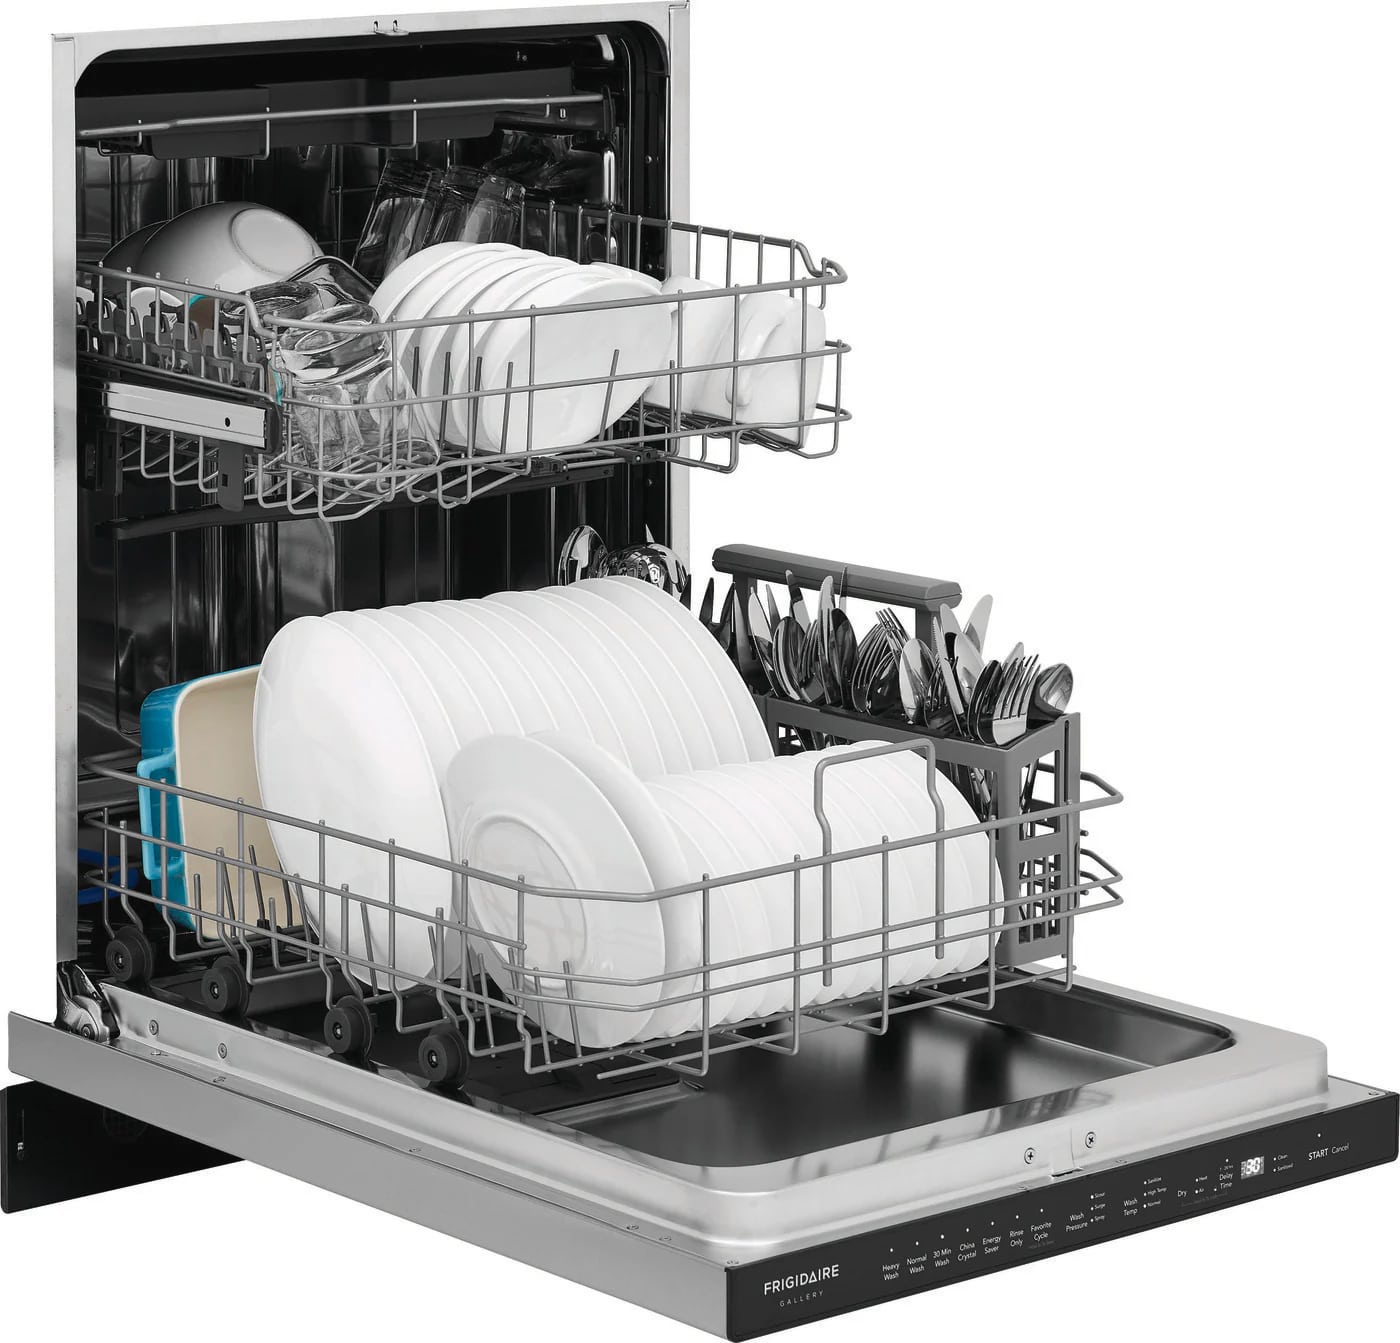 Frigidaire Gallery - 49 dBA Built In Dishwasher in Stainless - FGIP2479SF